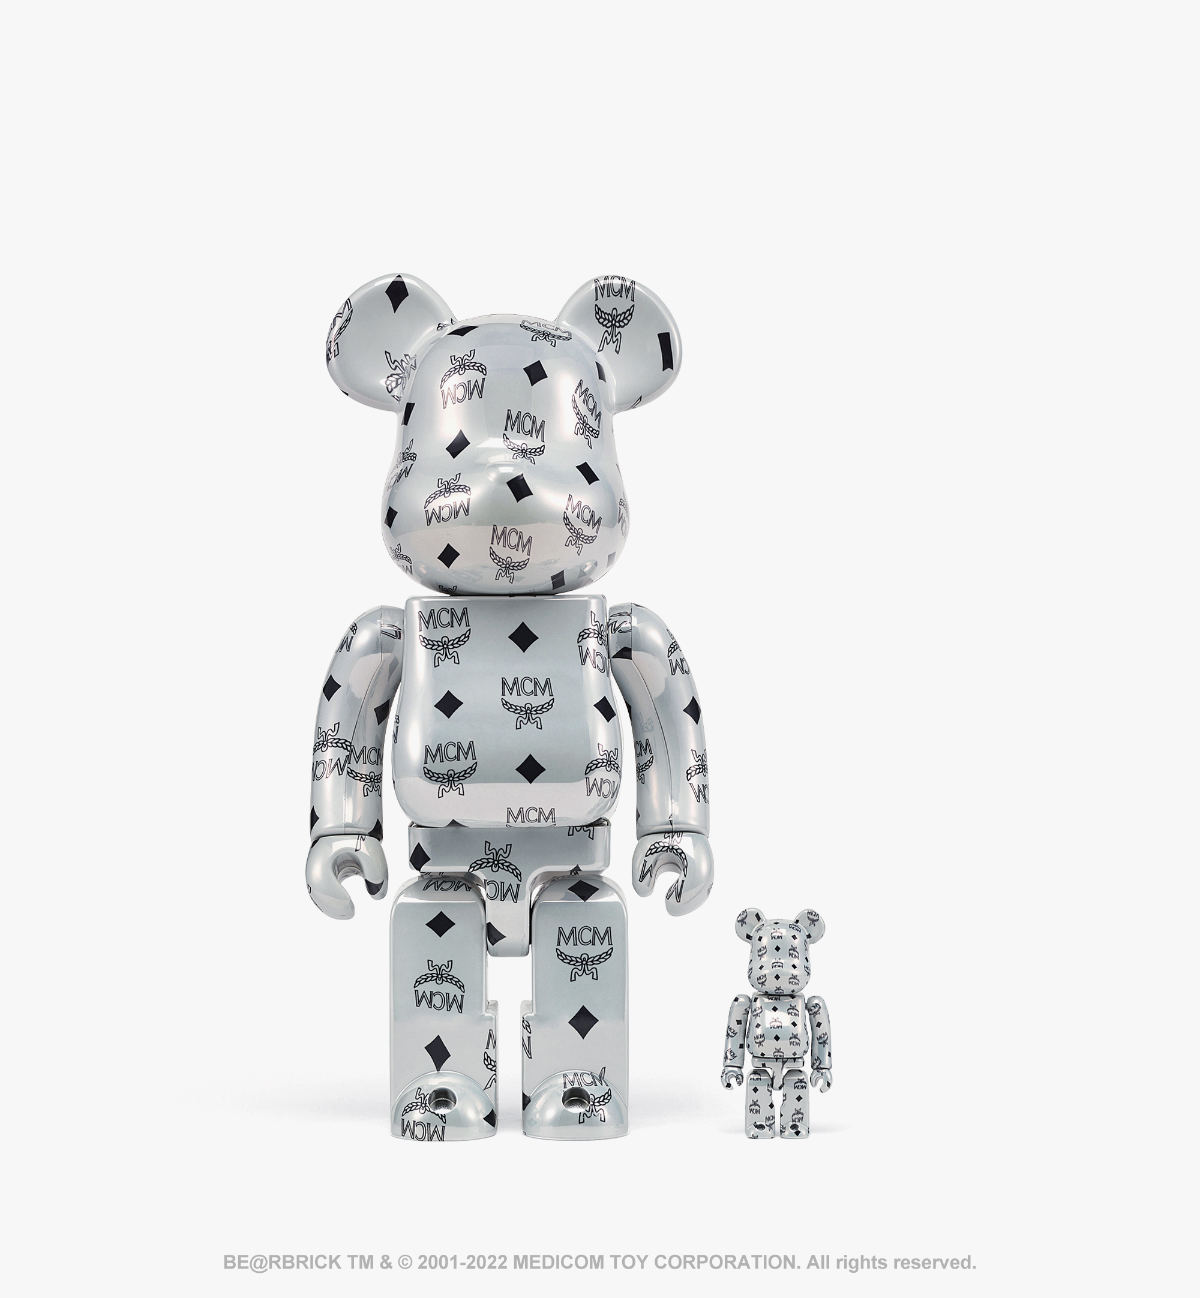 MCM X BE@RBRICK – The Next Collaboration